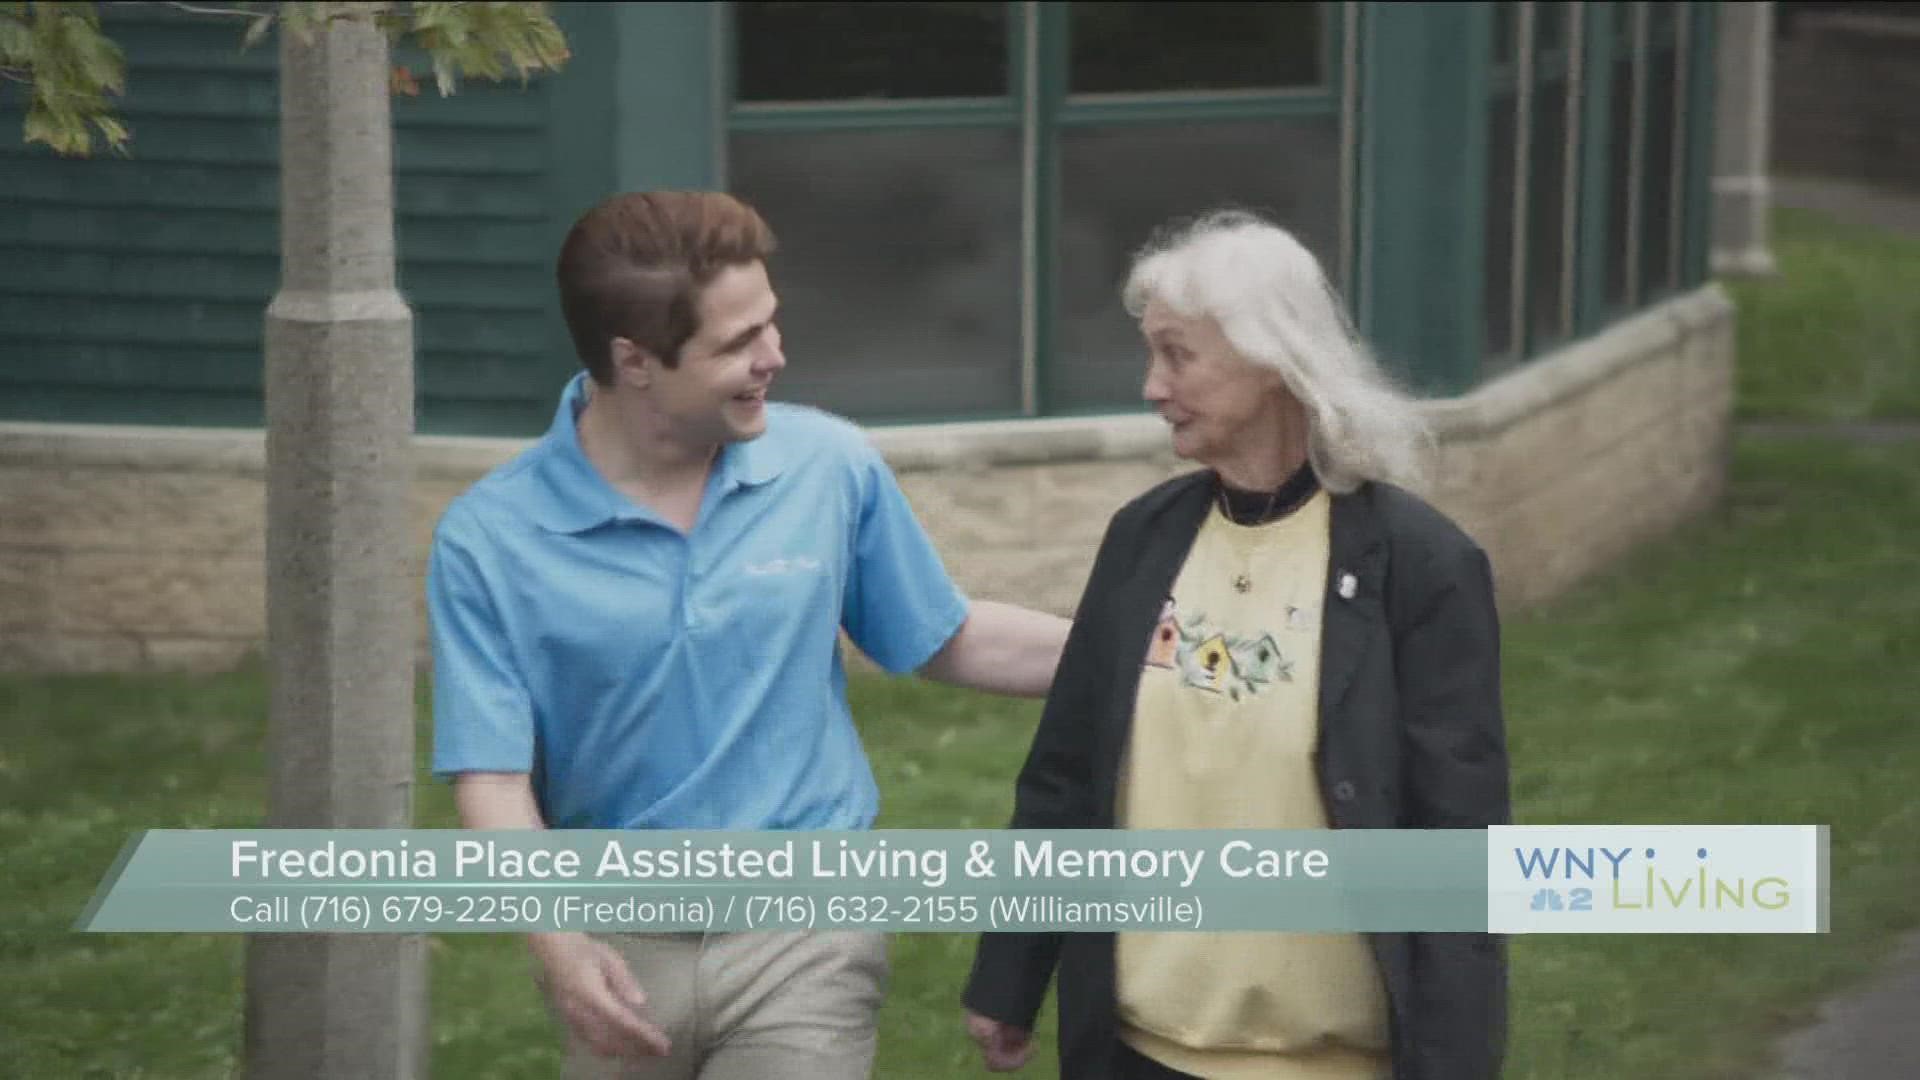 WNY Living- January 14- Fredonia Place Assisted Living & Memory Care